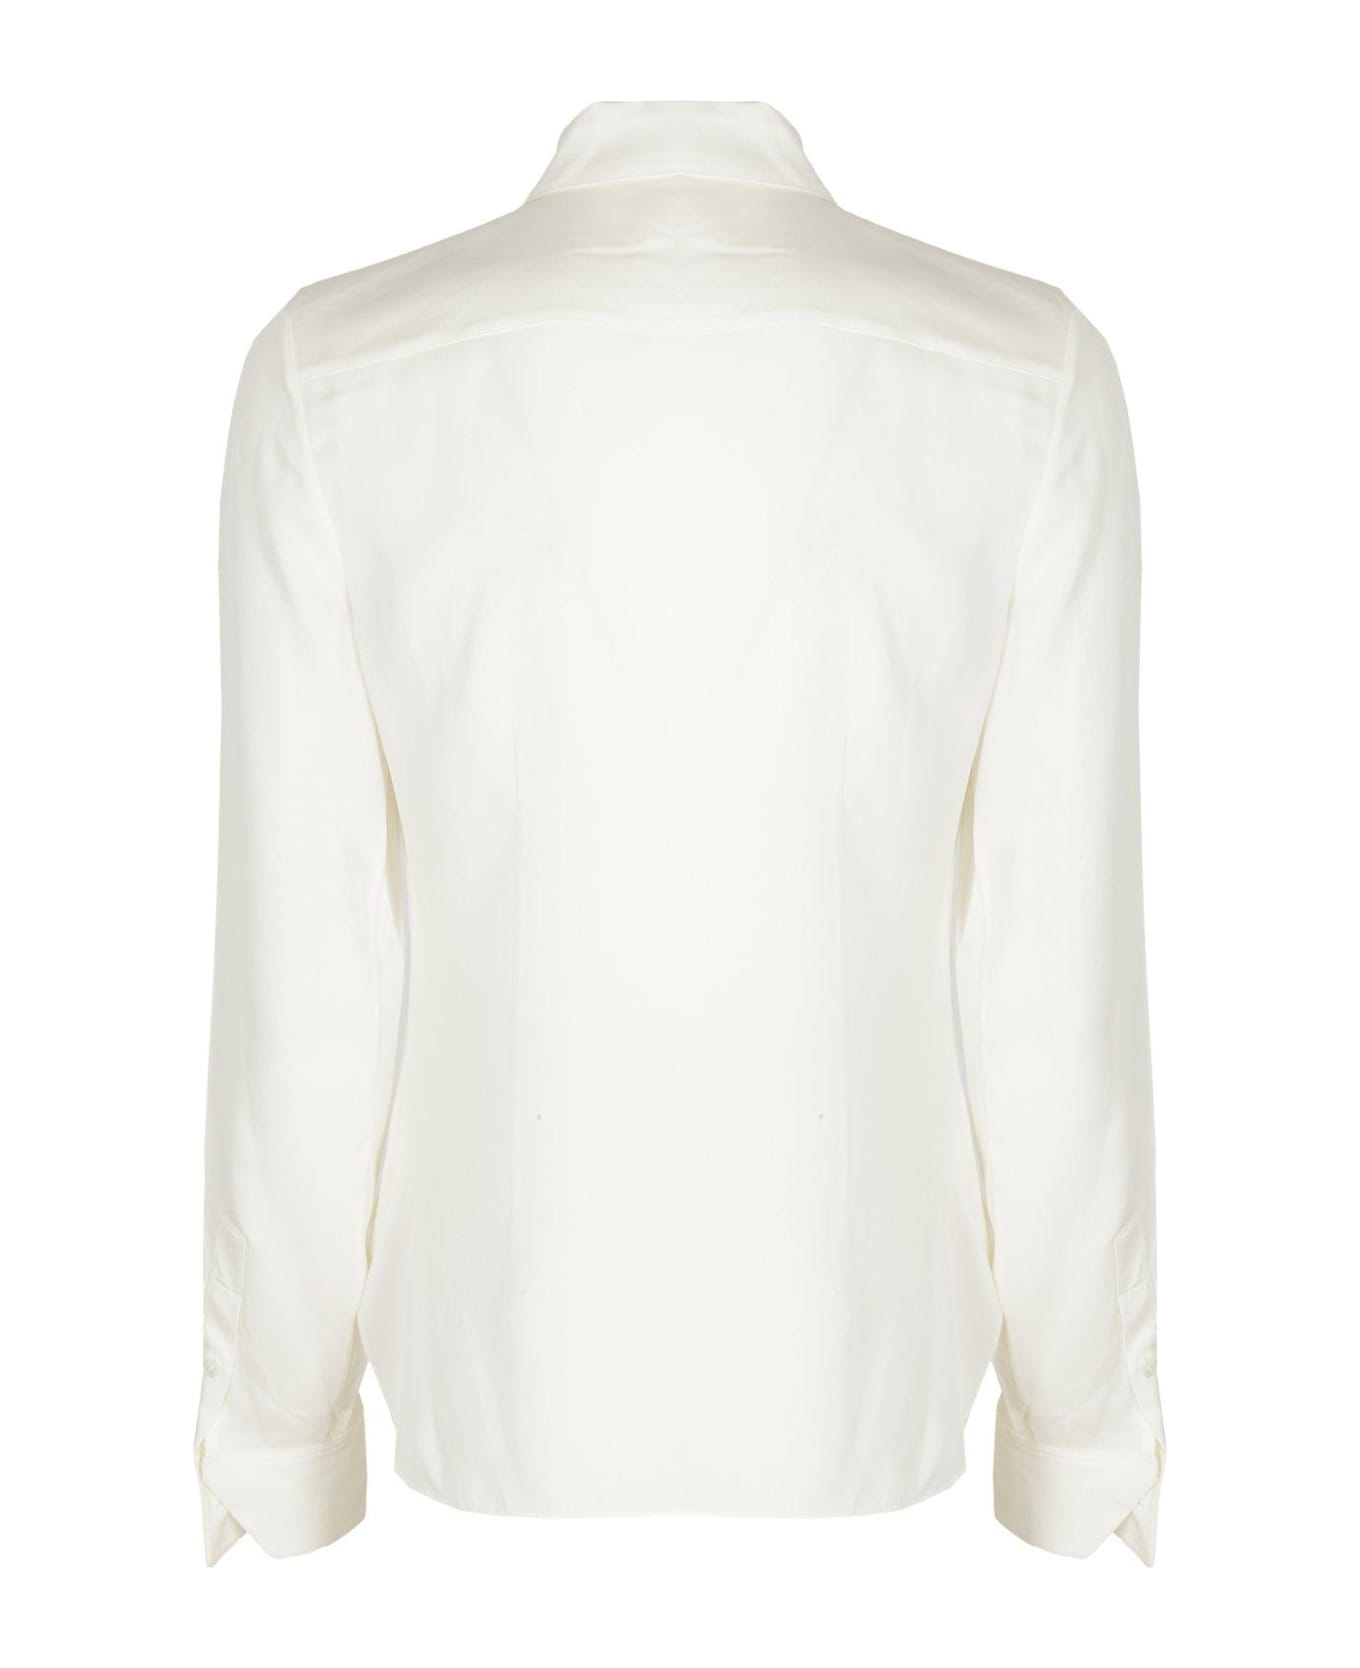 Theory Concealed Fastened Shirt - White